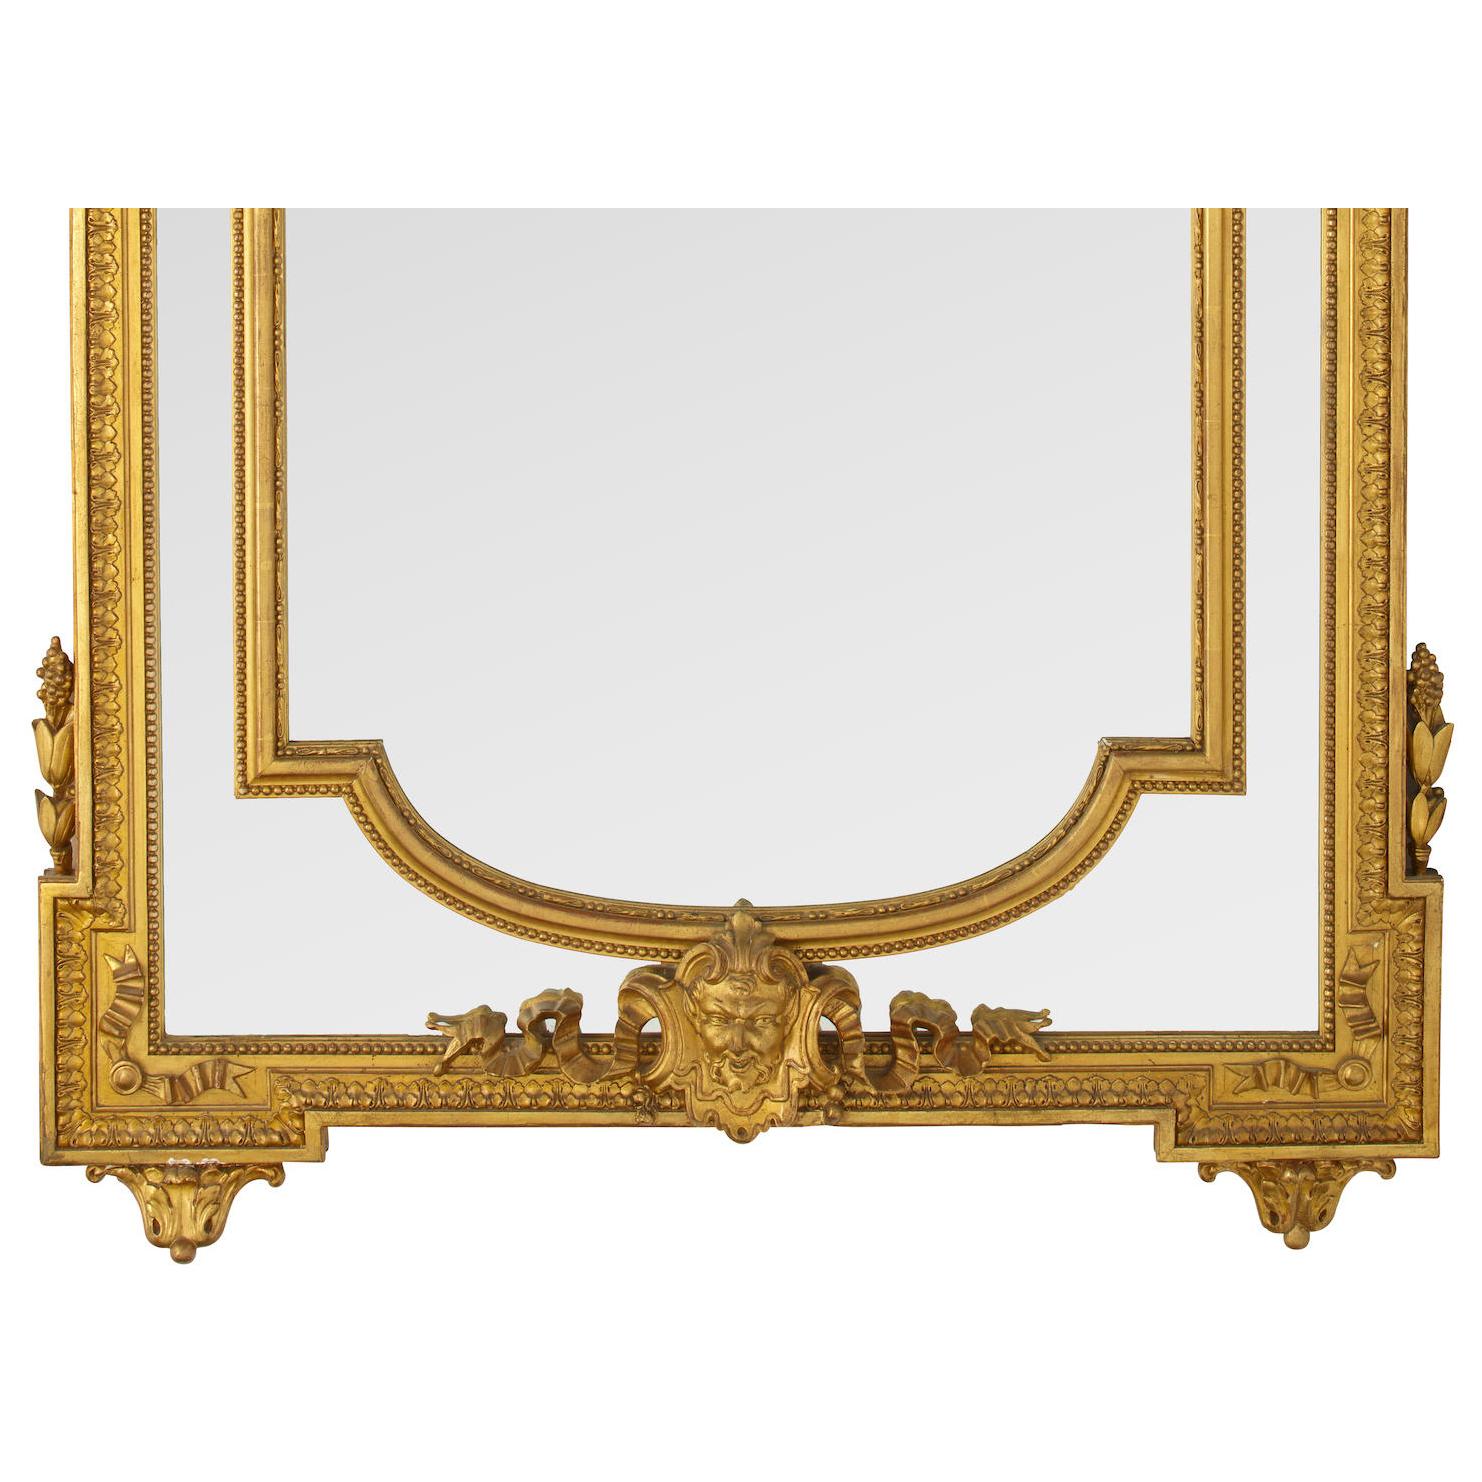 French 19th Century Louis XVI Style Gilt-Wood and Gilt-Gesso Carved Pier Mirror For Sale 1